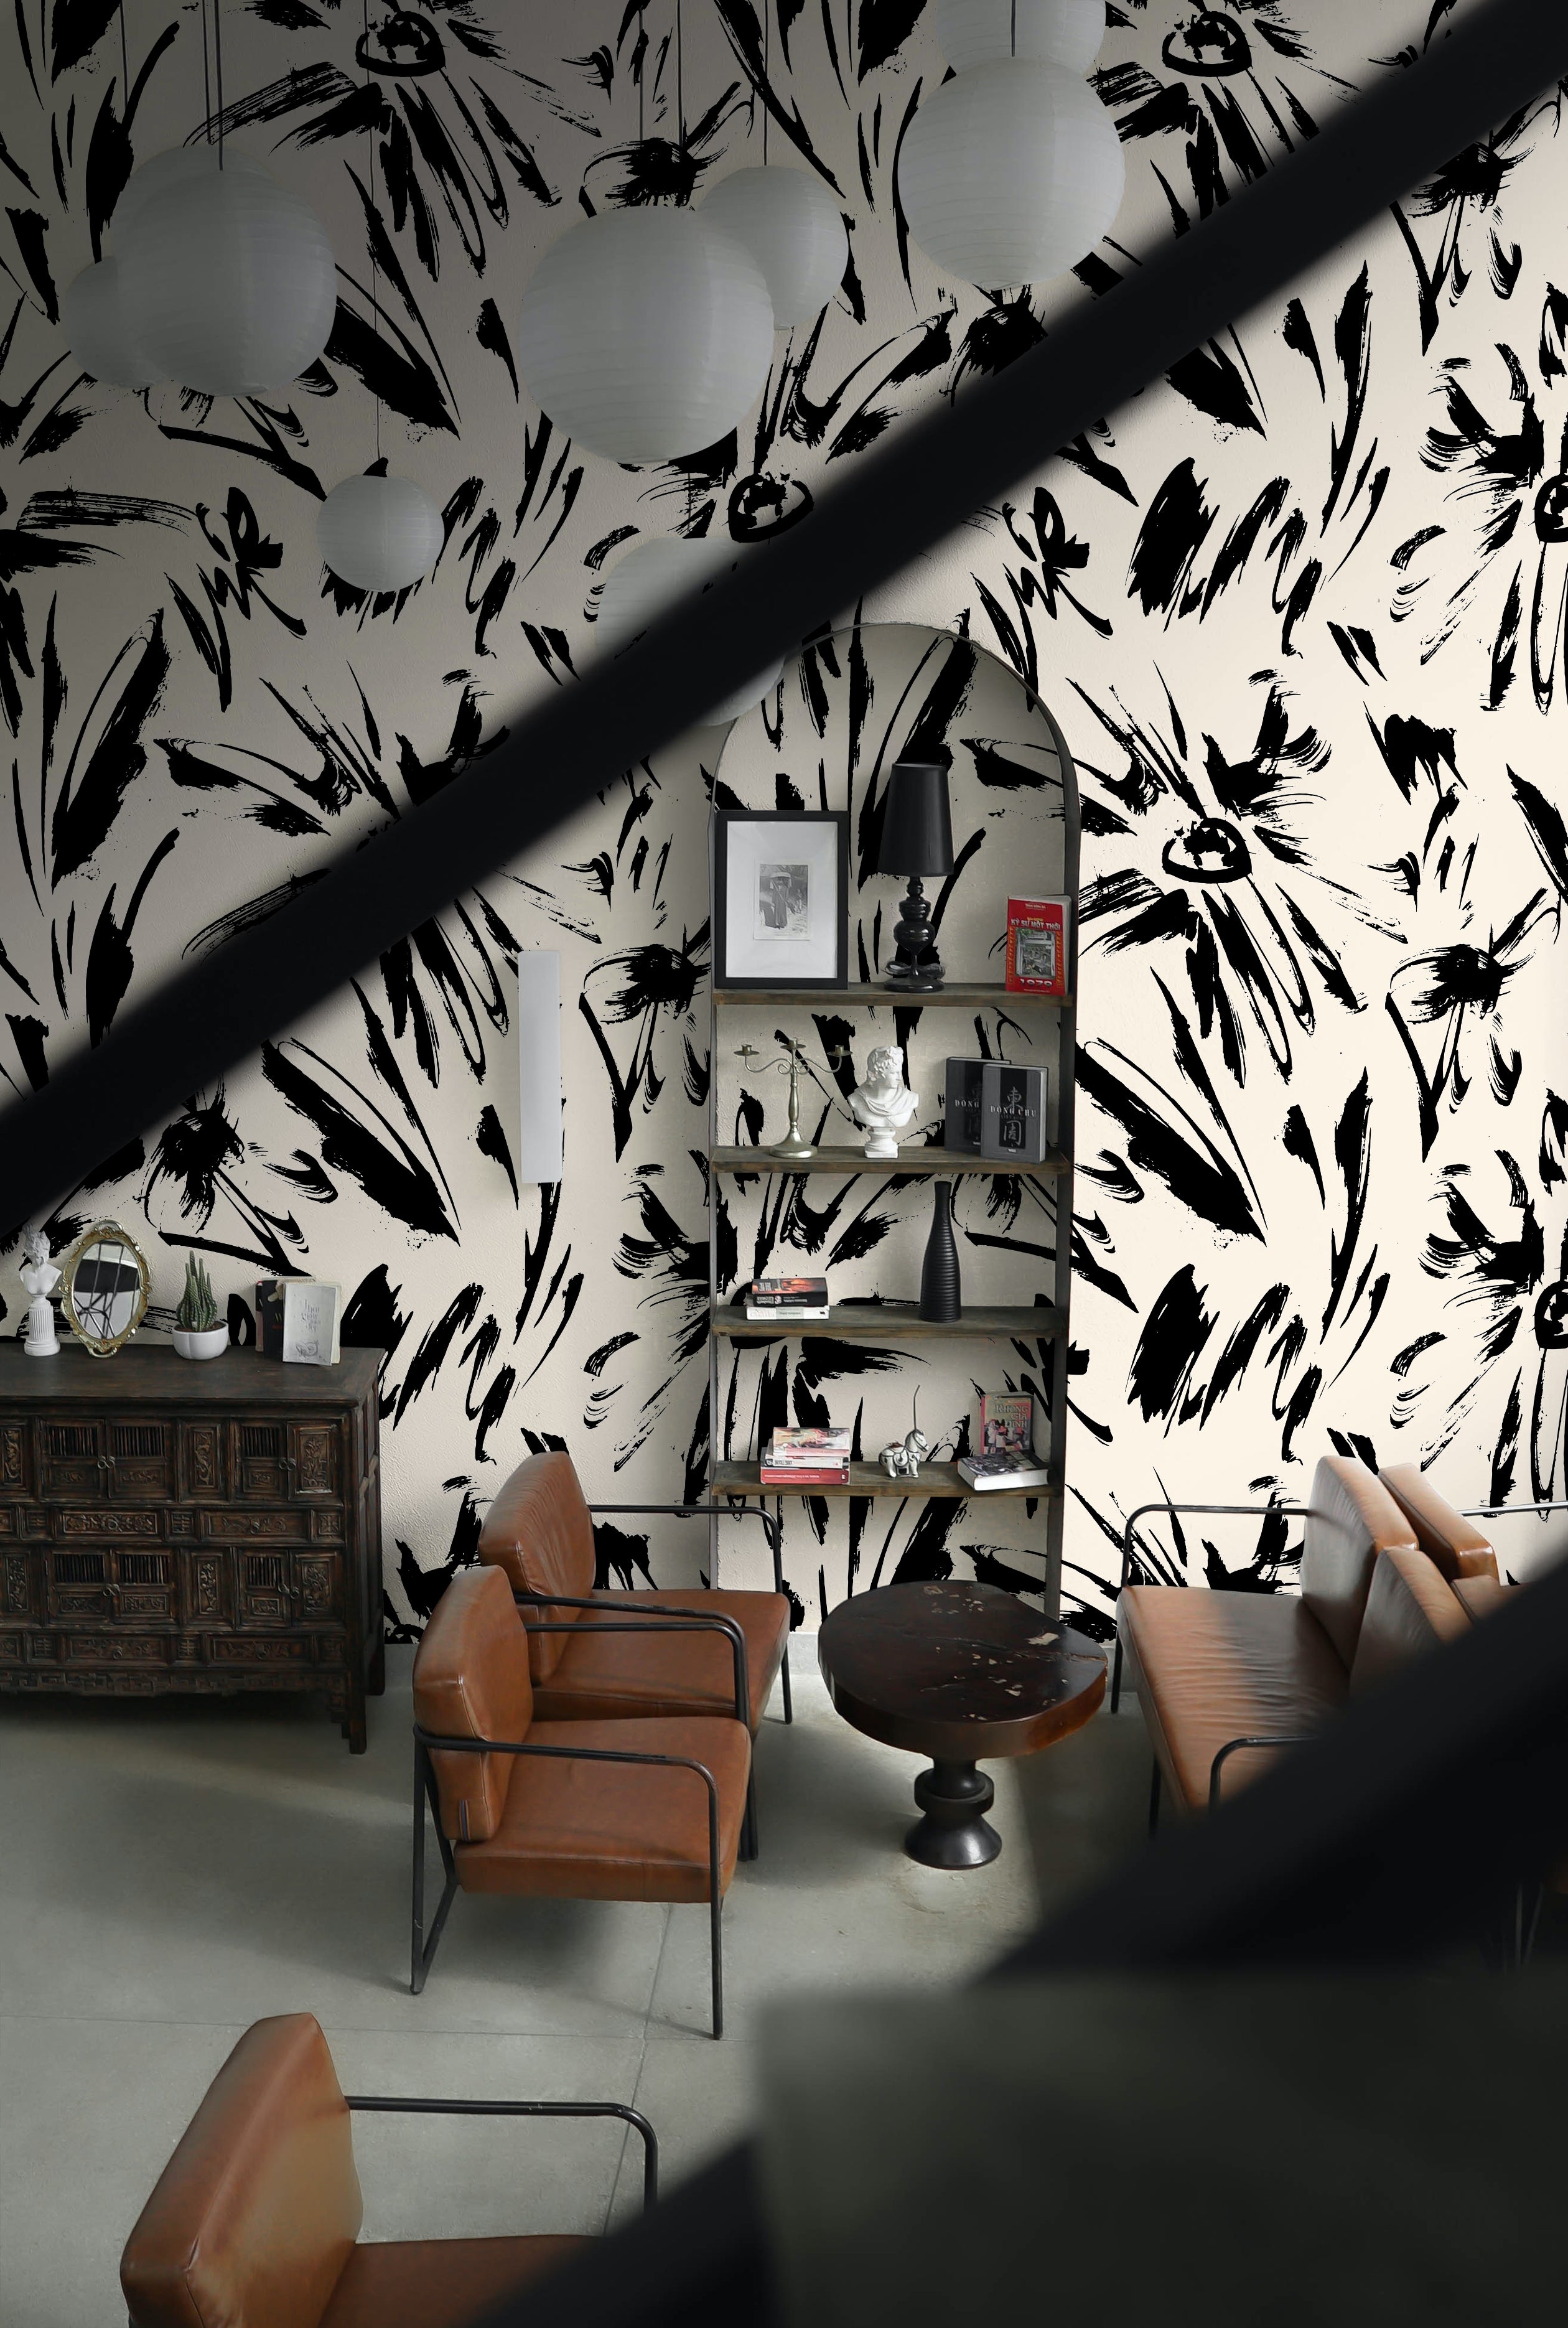 A stylish lounge area enhanced with the Modern Floral Sketch Wallpaper - 75", where the large black abstract floral patterns on a white background create a bold backdrop. The room features eclectic decor with vintage leather furniture and modern accessories, providing a chic and sophisticated environment.